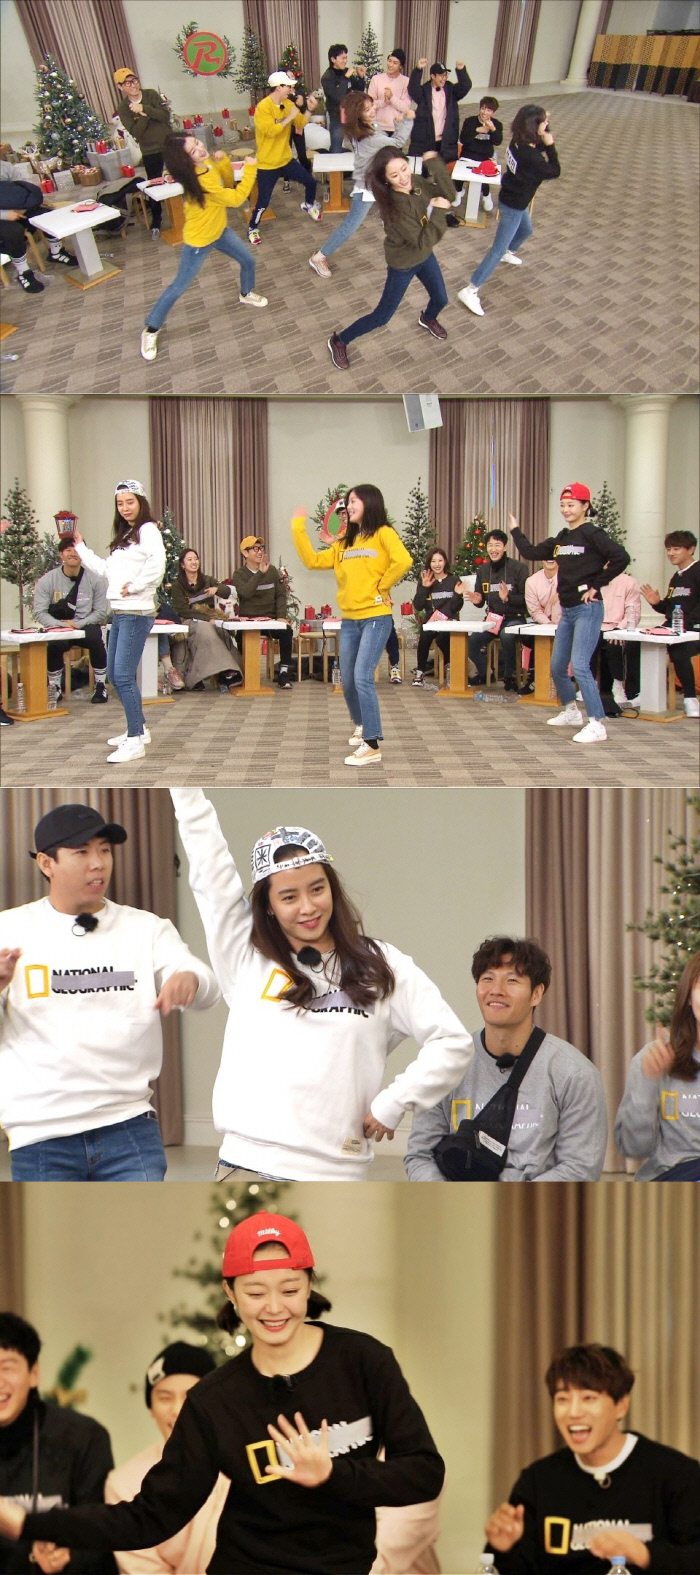 Song Ji-hyo - Jeon So-min showed dance skills hidden by the girl group dance parade of memories.On SBS <Running Man>, which is broadcasted on the 30th (Sun), a girl group dance parade will be held to recall the memories of Song Ji-hyo X Jeon So-min X Jeon Hye-bin X Sooyoung X Han Sun-hwa X Park Ha-na.Members and guests continued the Isadon talk, which actor Jeon Hye-bin played in entertainment in the past during the recent Running Man filming, and Jeon Hye-bin showed rusty dance skills and added the heat of the filming scene.Han Sun-hwa then added Secrets Madonna with Song Ji-hyo and Jeon So-min.The atmosphere of the memorable stage of the impression was hot, and the girlhood Sooyoung and the idol singer Park Ha-na joined together to form a project girl group and received a standing ovation by showing the perfect synchro rate of memories.In addition, Jeon So-min was a class formation, but other members danced in the opposite direction compared to the show of Carl, and Jeon So-min laughed at the answer, I learn to dance on TV and do the opposite.Memories of touching and laughing Recall Dance Daejeon will be unveiled at <Running Man> broadcasted at 4:50 pm on Sunday, 30th.In the 2018 SBS Entertainment Awards held on the 28th, Running Man received the Best Teamwork Award, Lee Kwang-soo won the Popular Award and Jeon So-min won the Best Award.